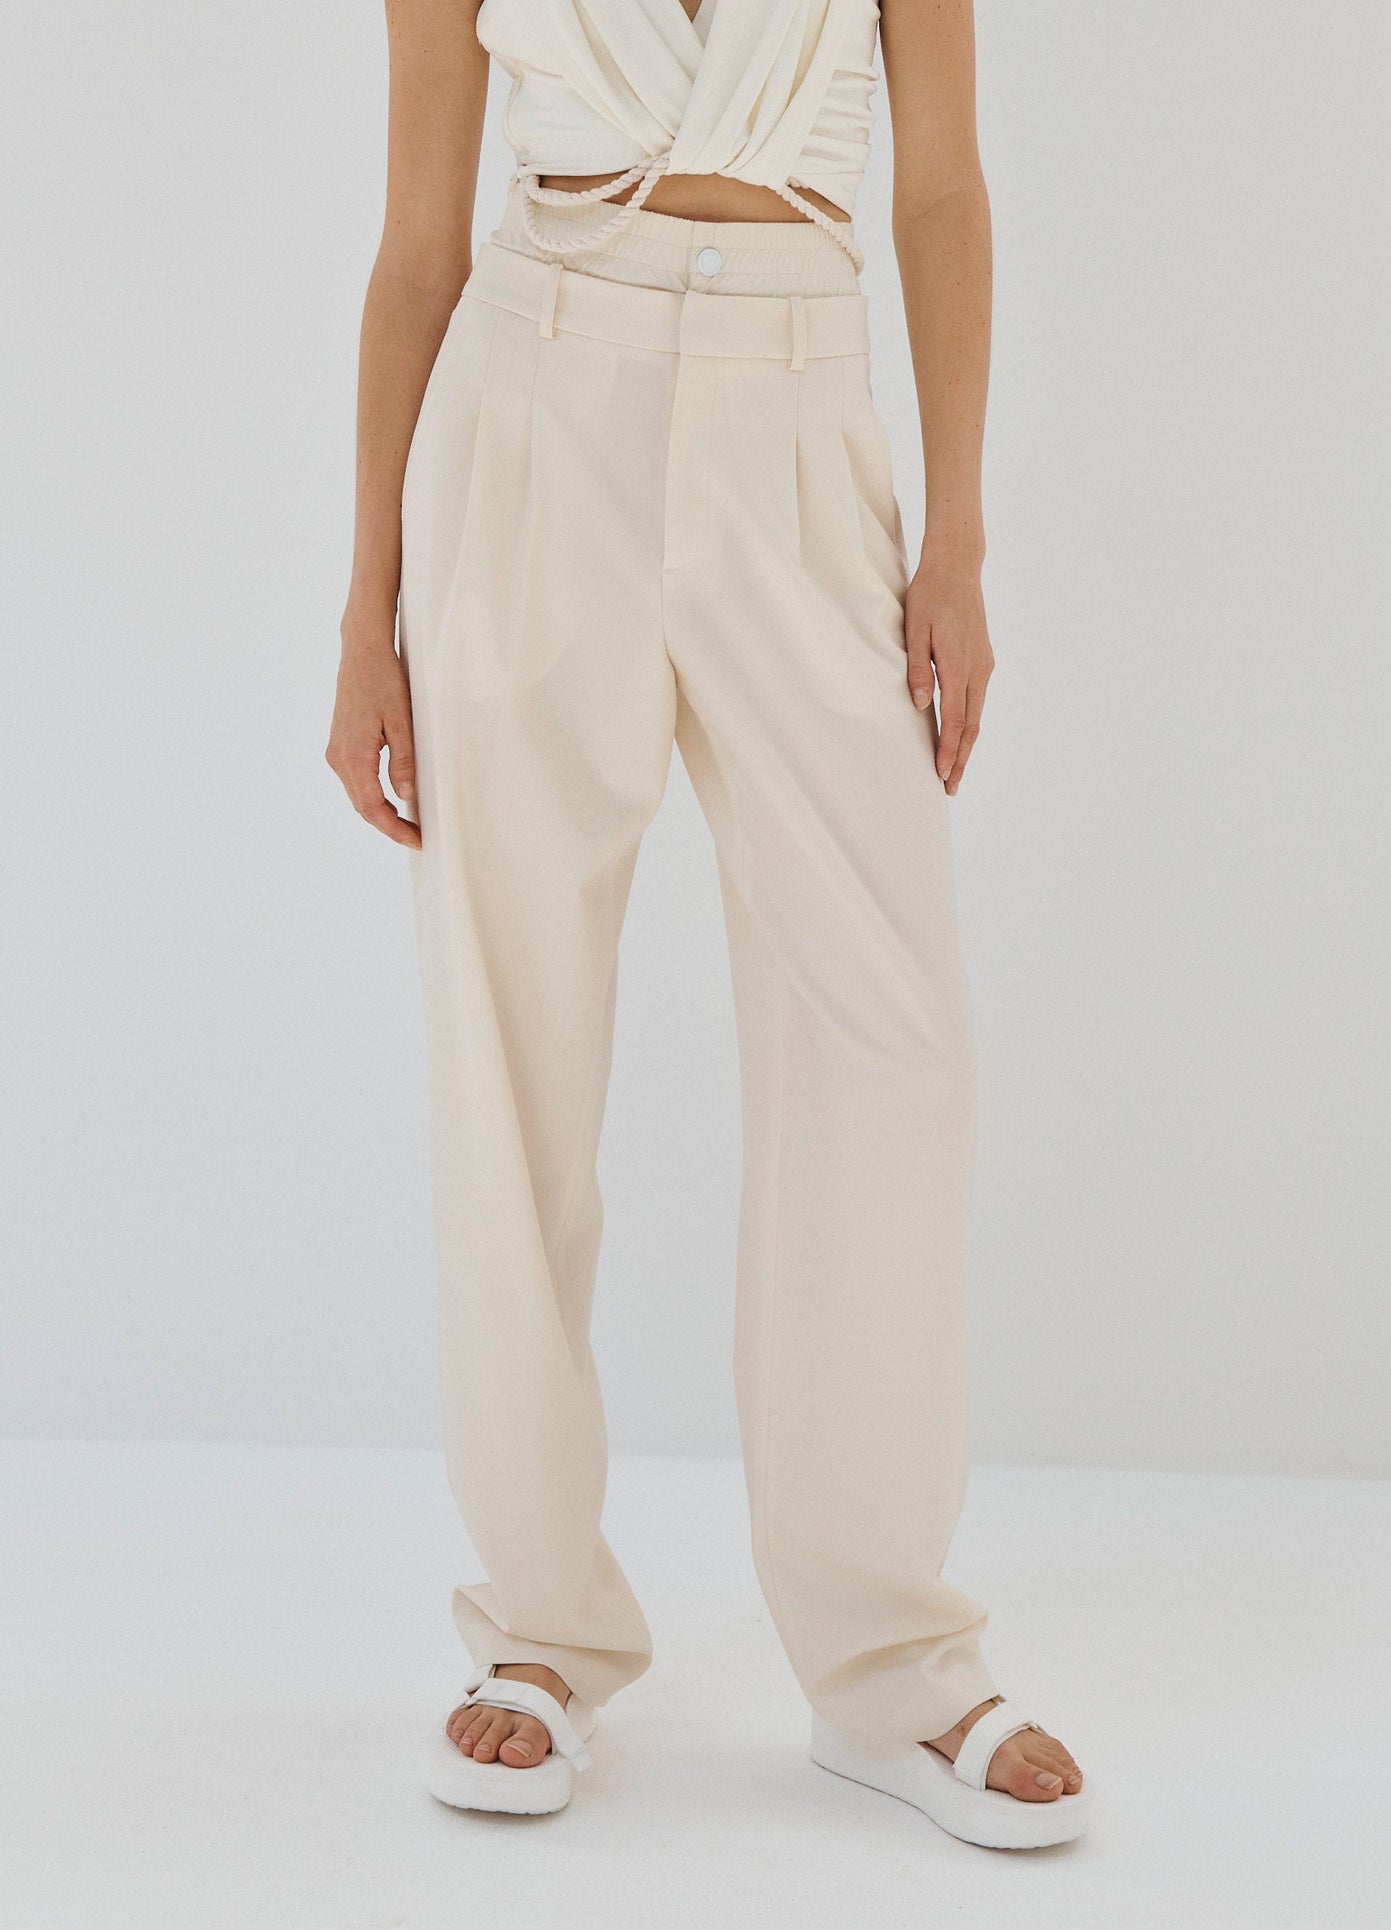 MONSE Double Waistband Trouser in Ivory on Model Front Detail View